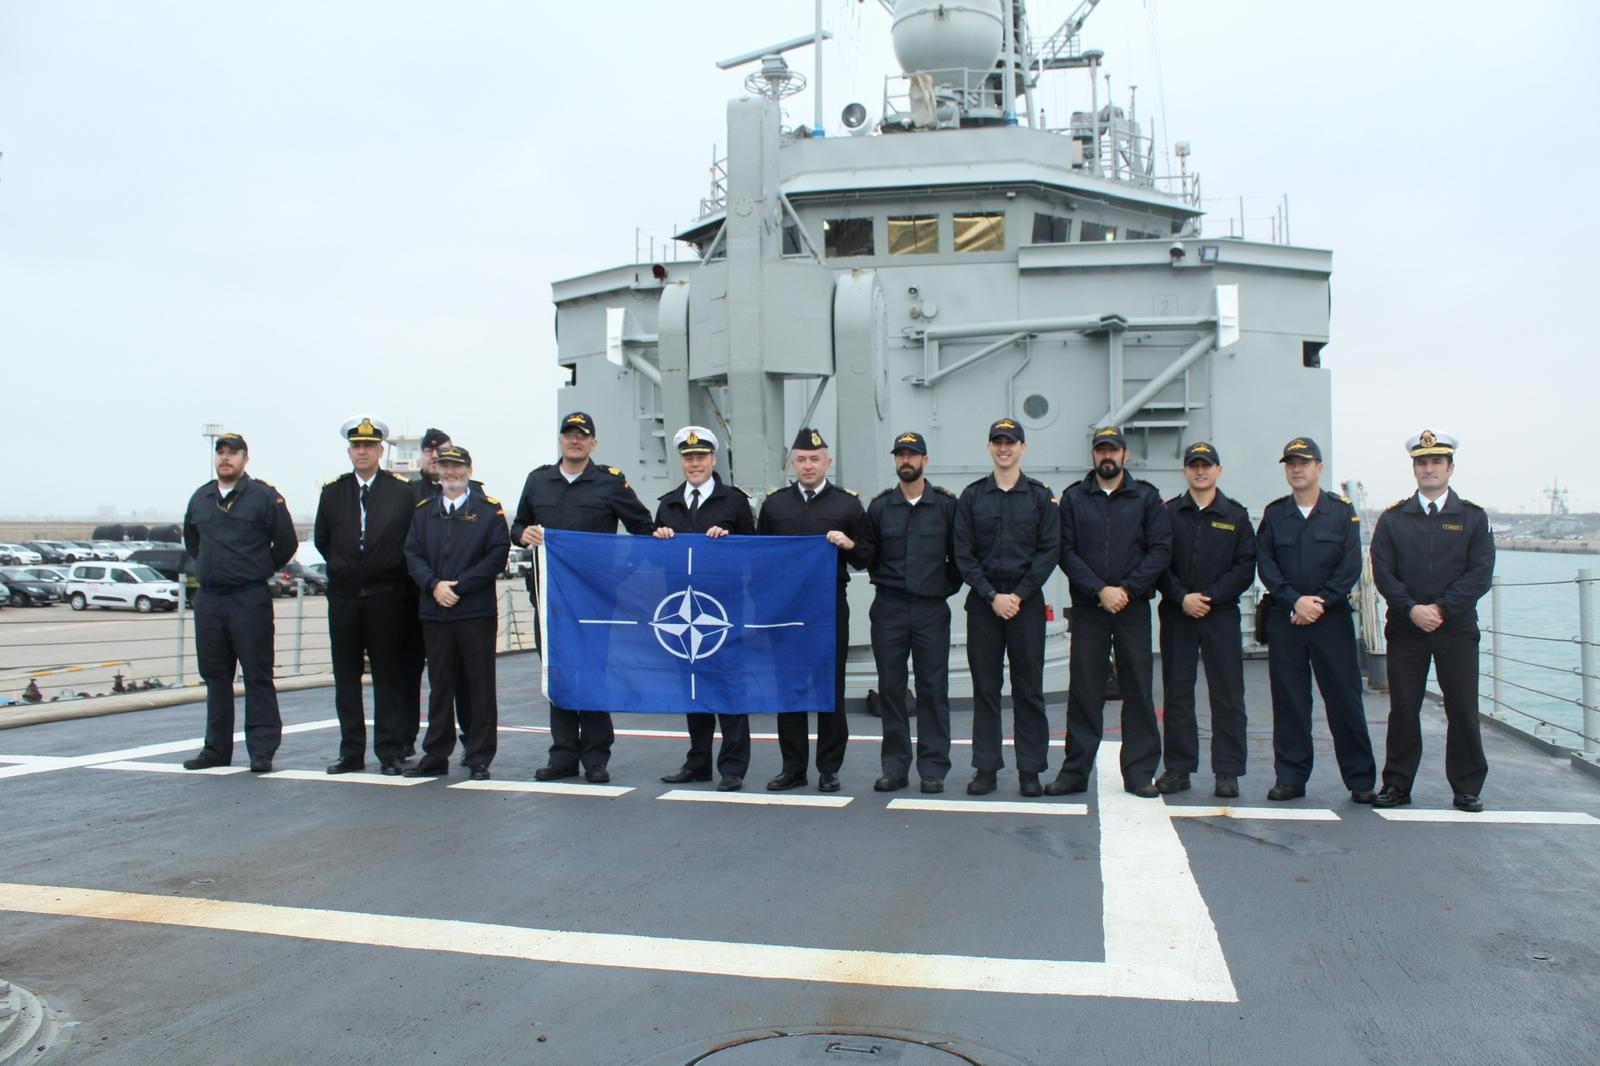 Frigate and MARCOM personnel